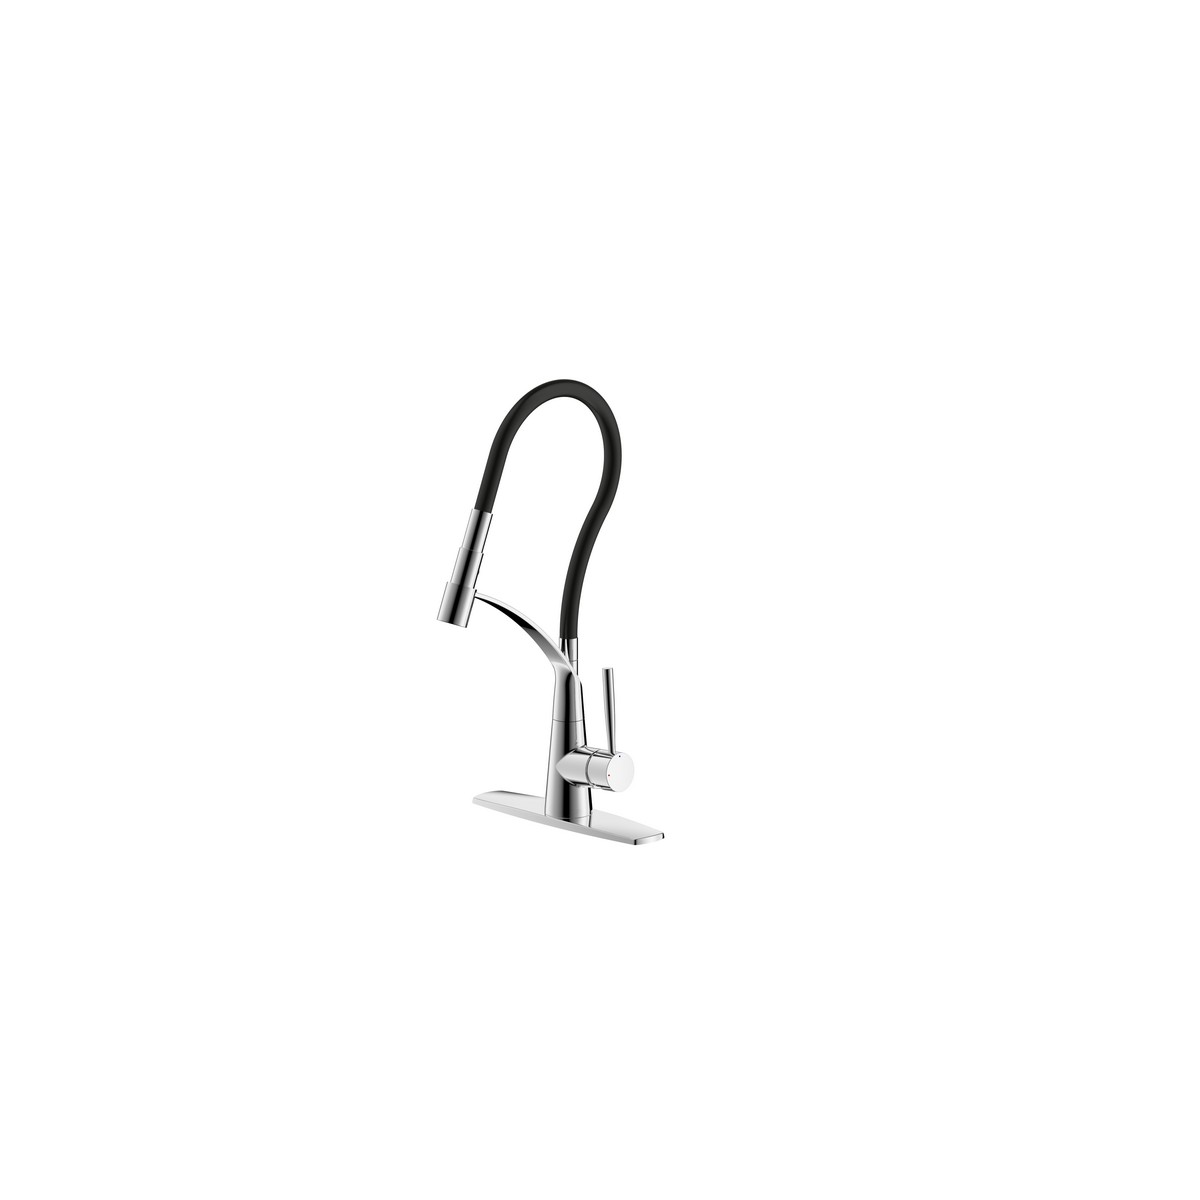 ULTRA FAUCETS UF1790 PAGANI DECK MOUNT SINGLE HANDLE KITCHEN FAUCET WITH PULL-DOWN SPRAY